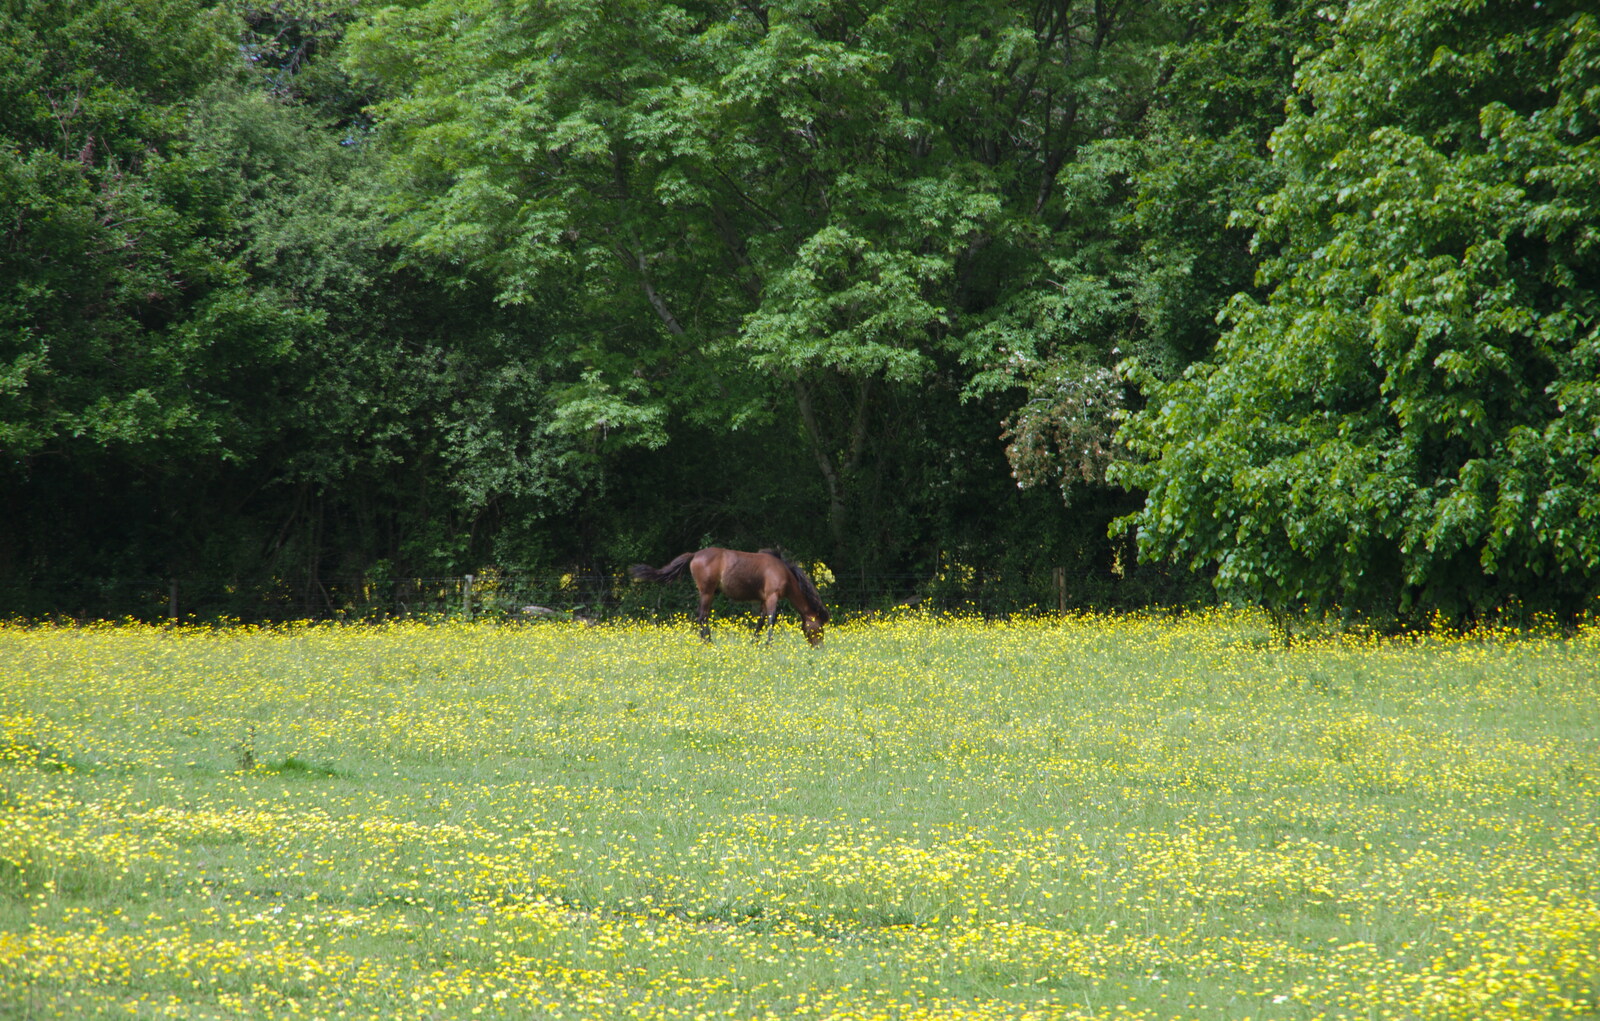 A pony in a yellow field from Chagford Lido and a Trip to Parke, Bovey Tracey, Devon - 25th May 2019